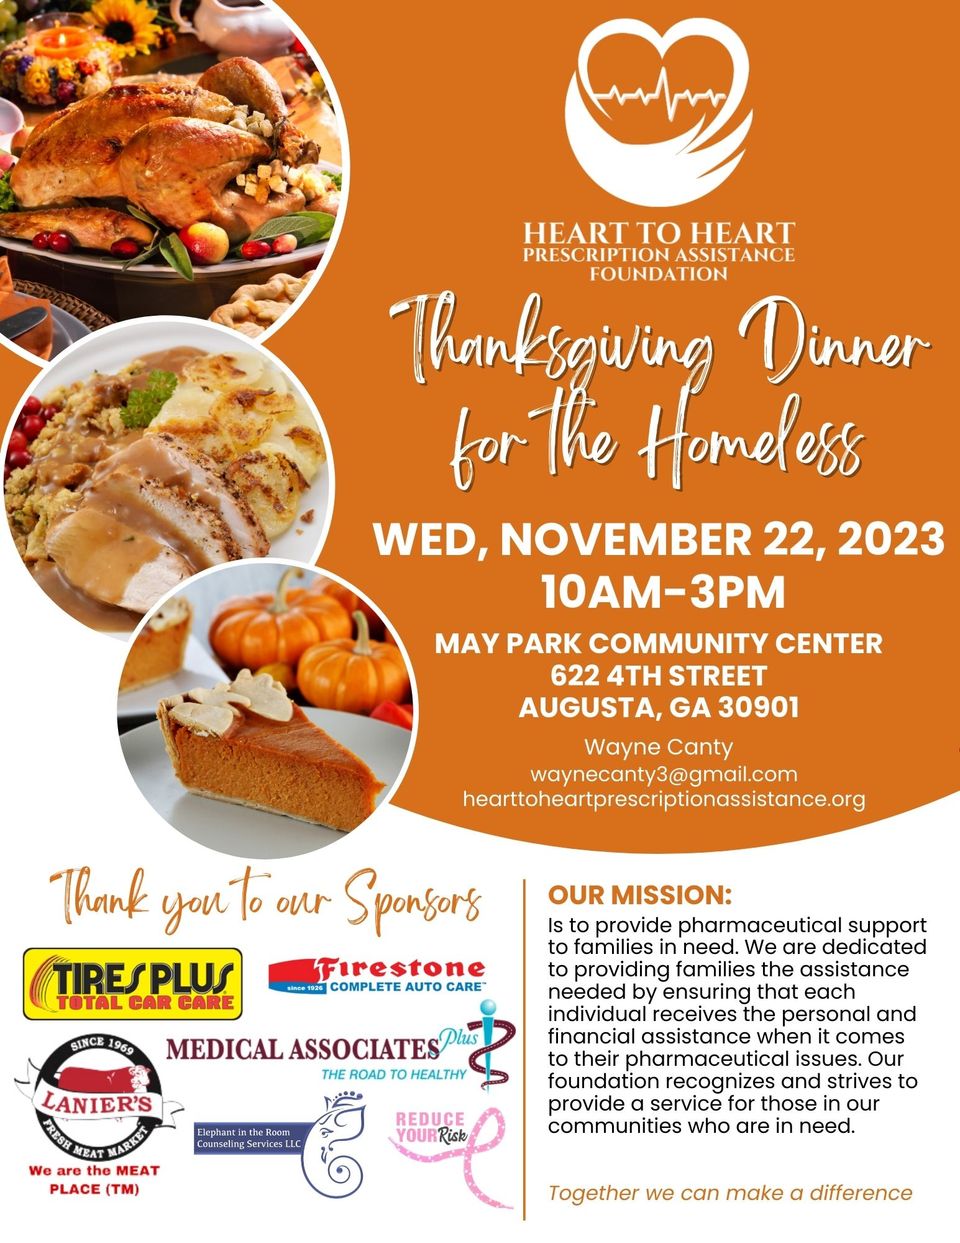 Heart to heart fundraising events